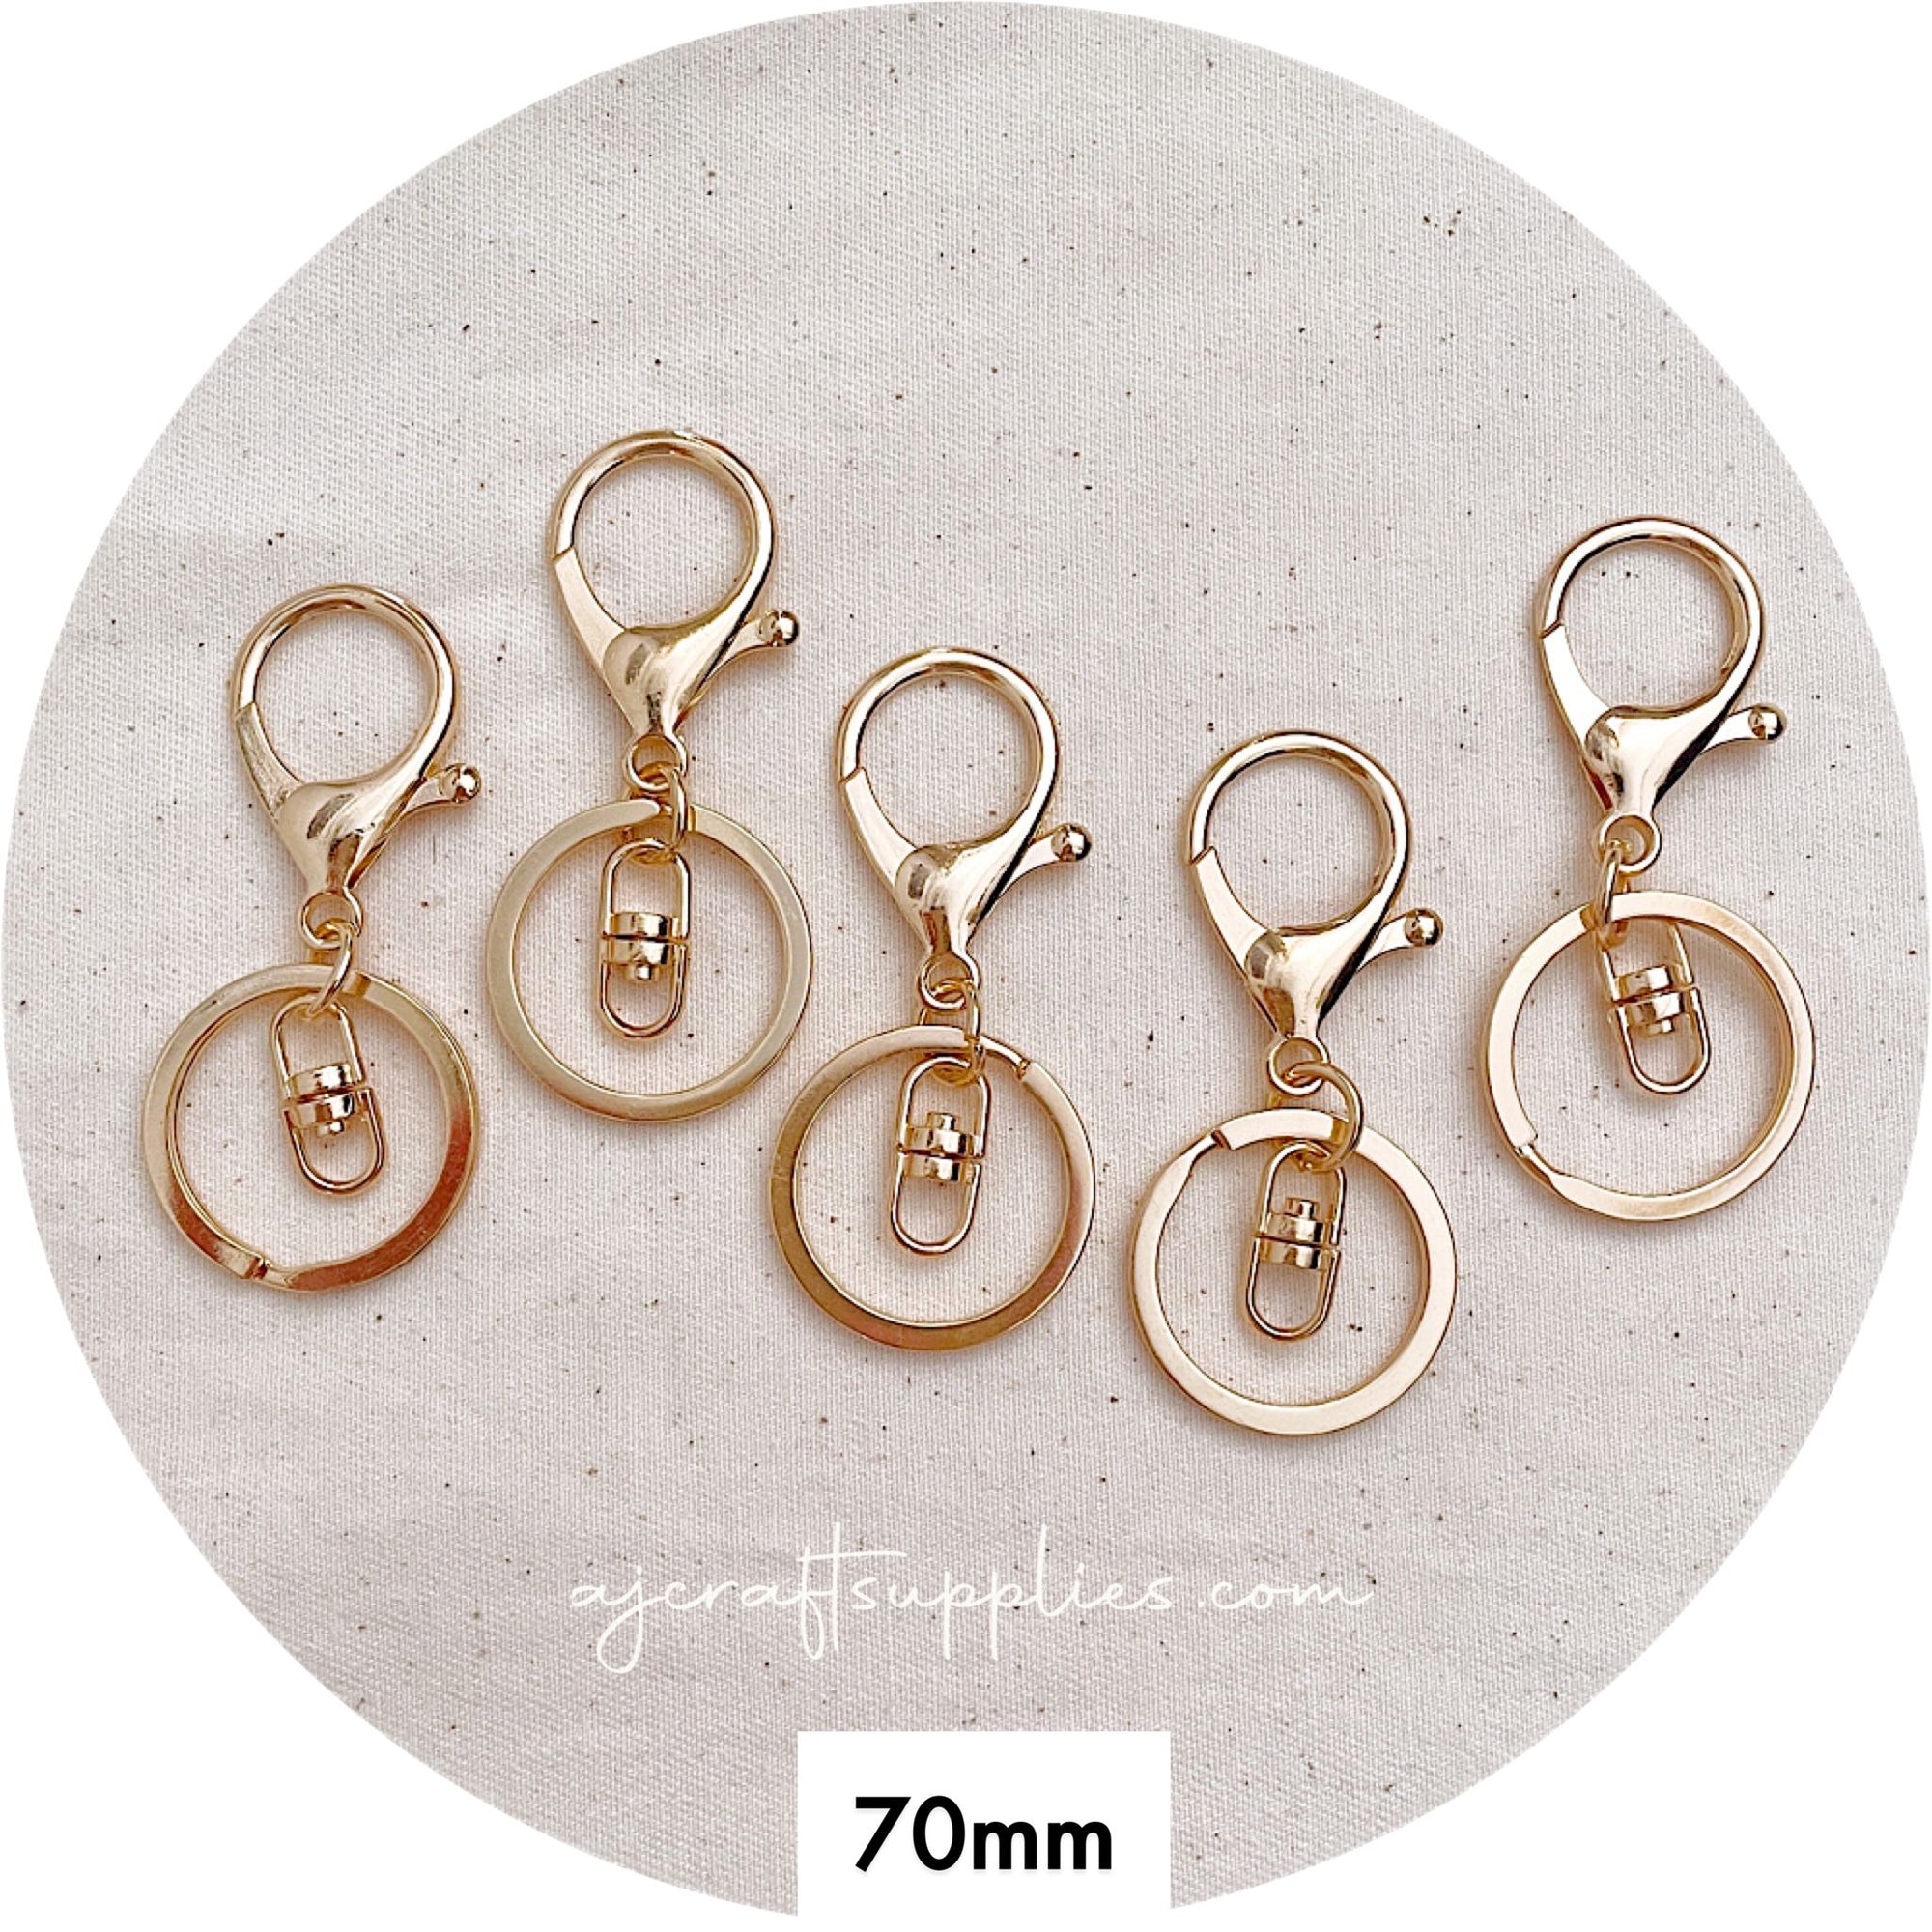 70mm Large Lobster Clasp & Keyring - Light Gold (Standard Quality) - 5 Clasp